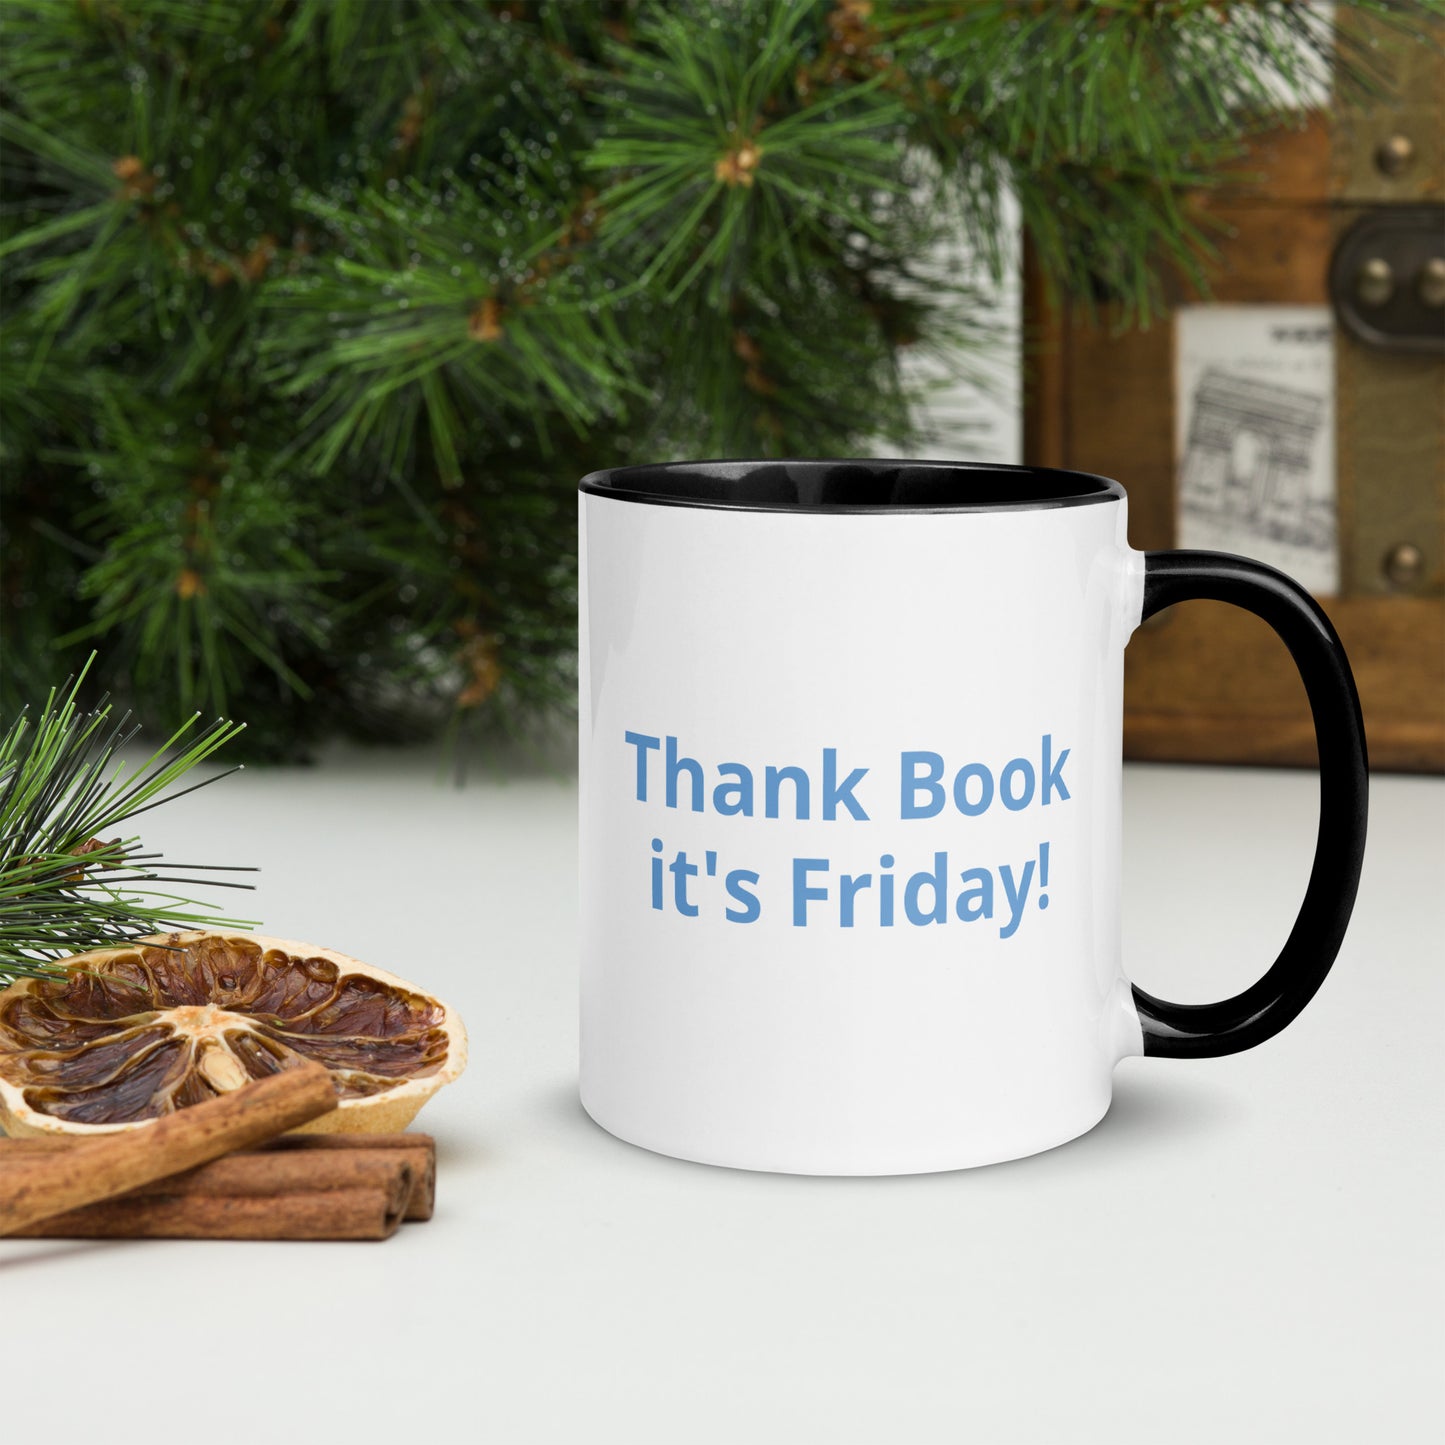 Thank Book it's Friday!